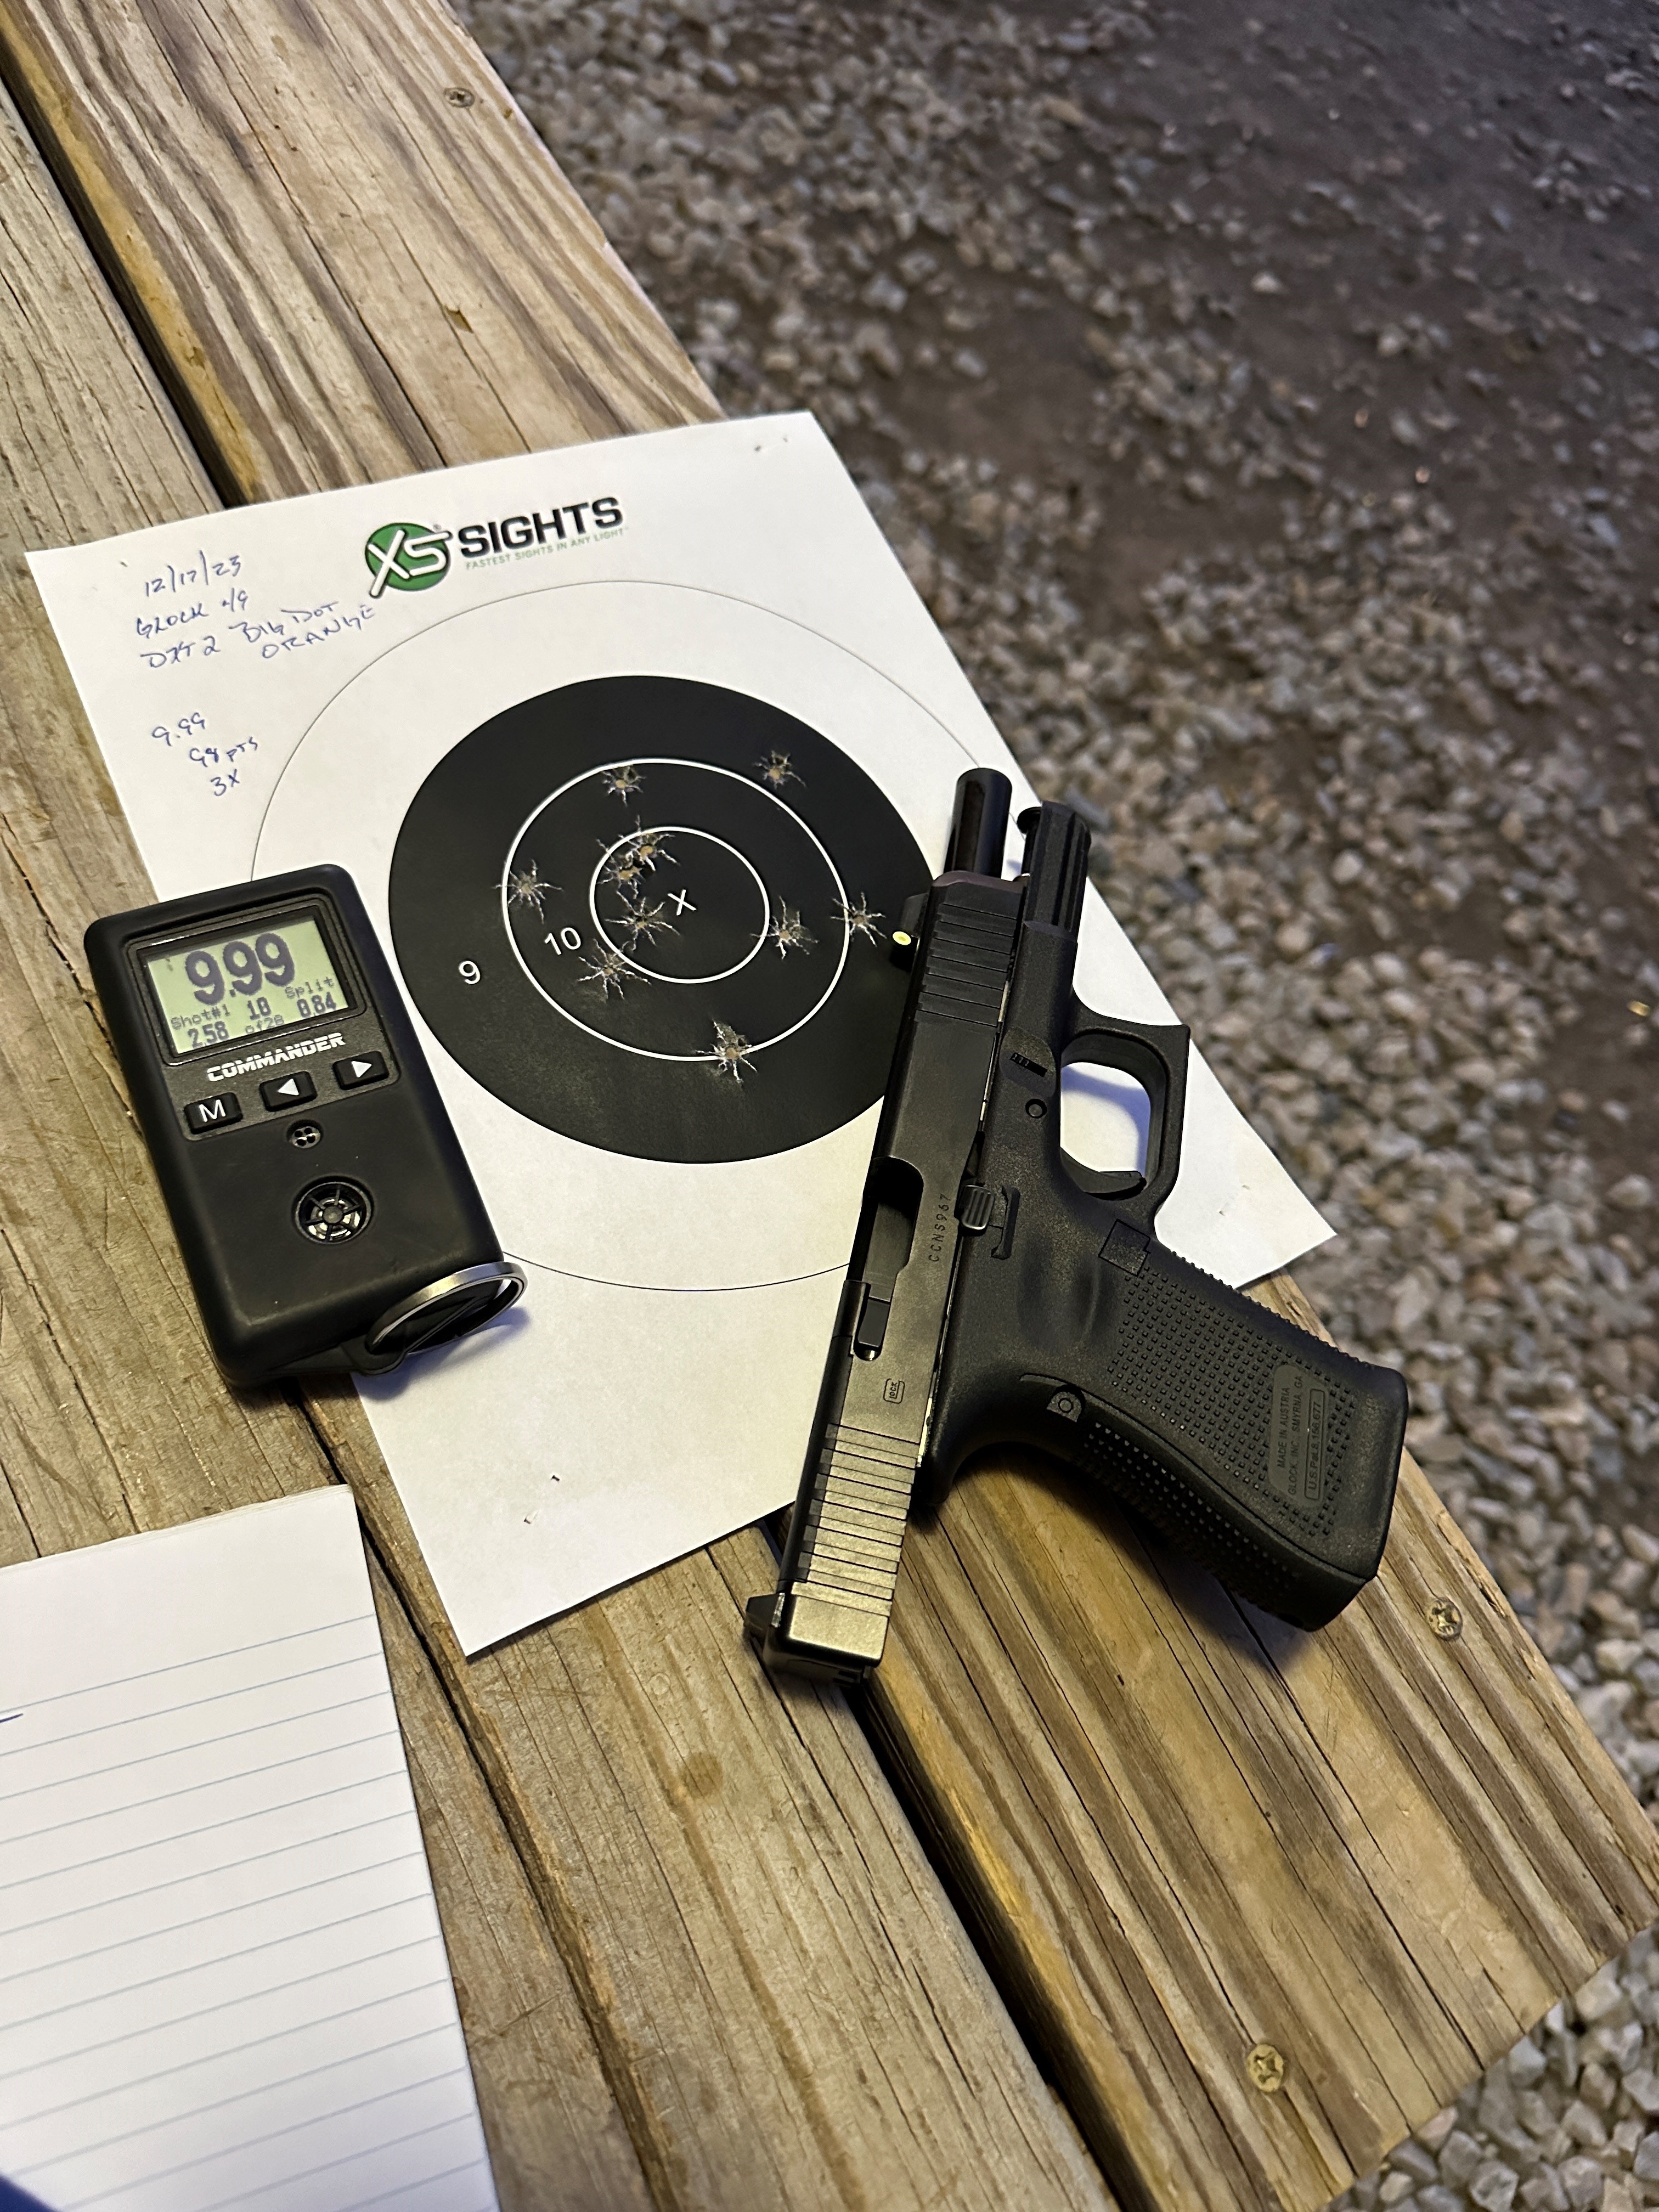 vickers test with Glock 49